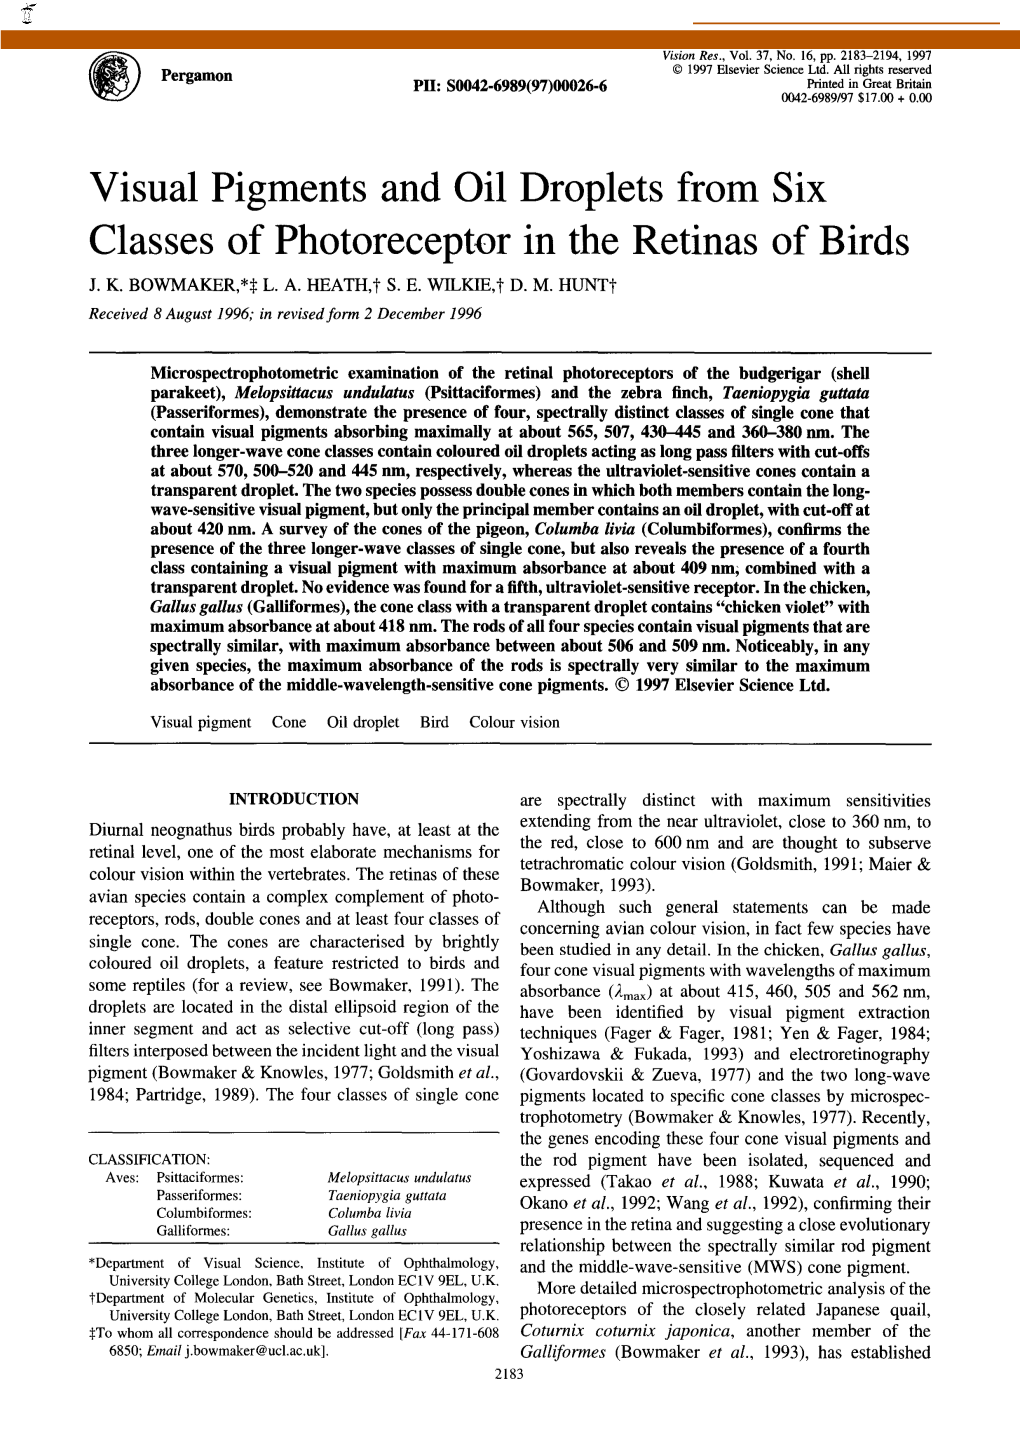 Visual Pigments and Oil Droplets from Six Classes of Photoreceptor in the Retinas of Birds J